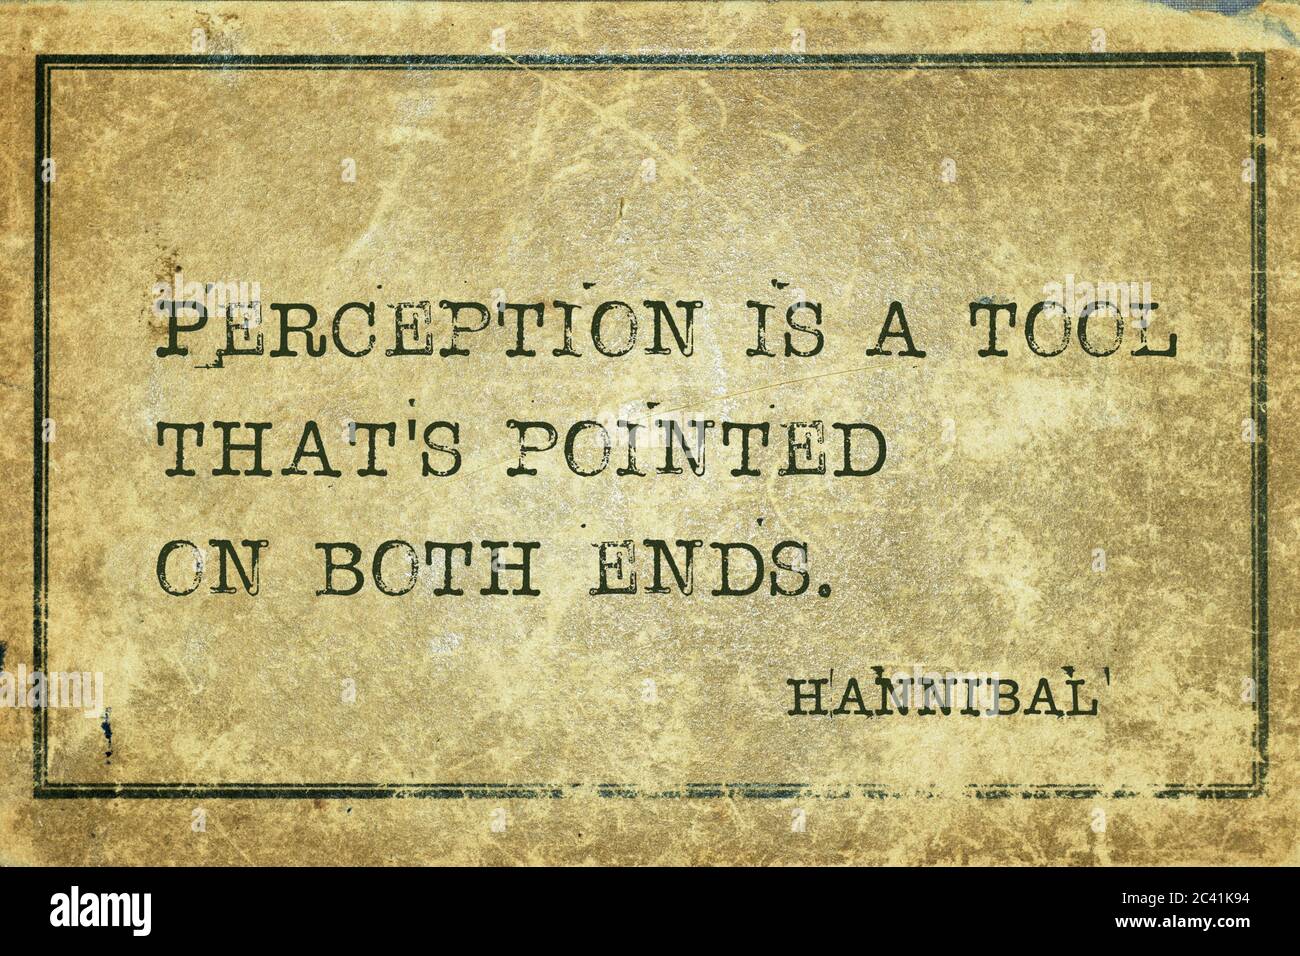 Perception is a tool that's pointed on both ends - quote of ancient Carthage general and statesman Hannibal printed on grunge vintage cardboard Stock Photo